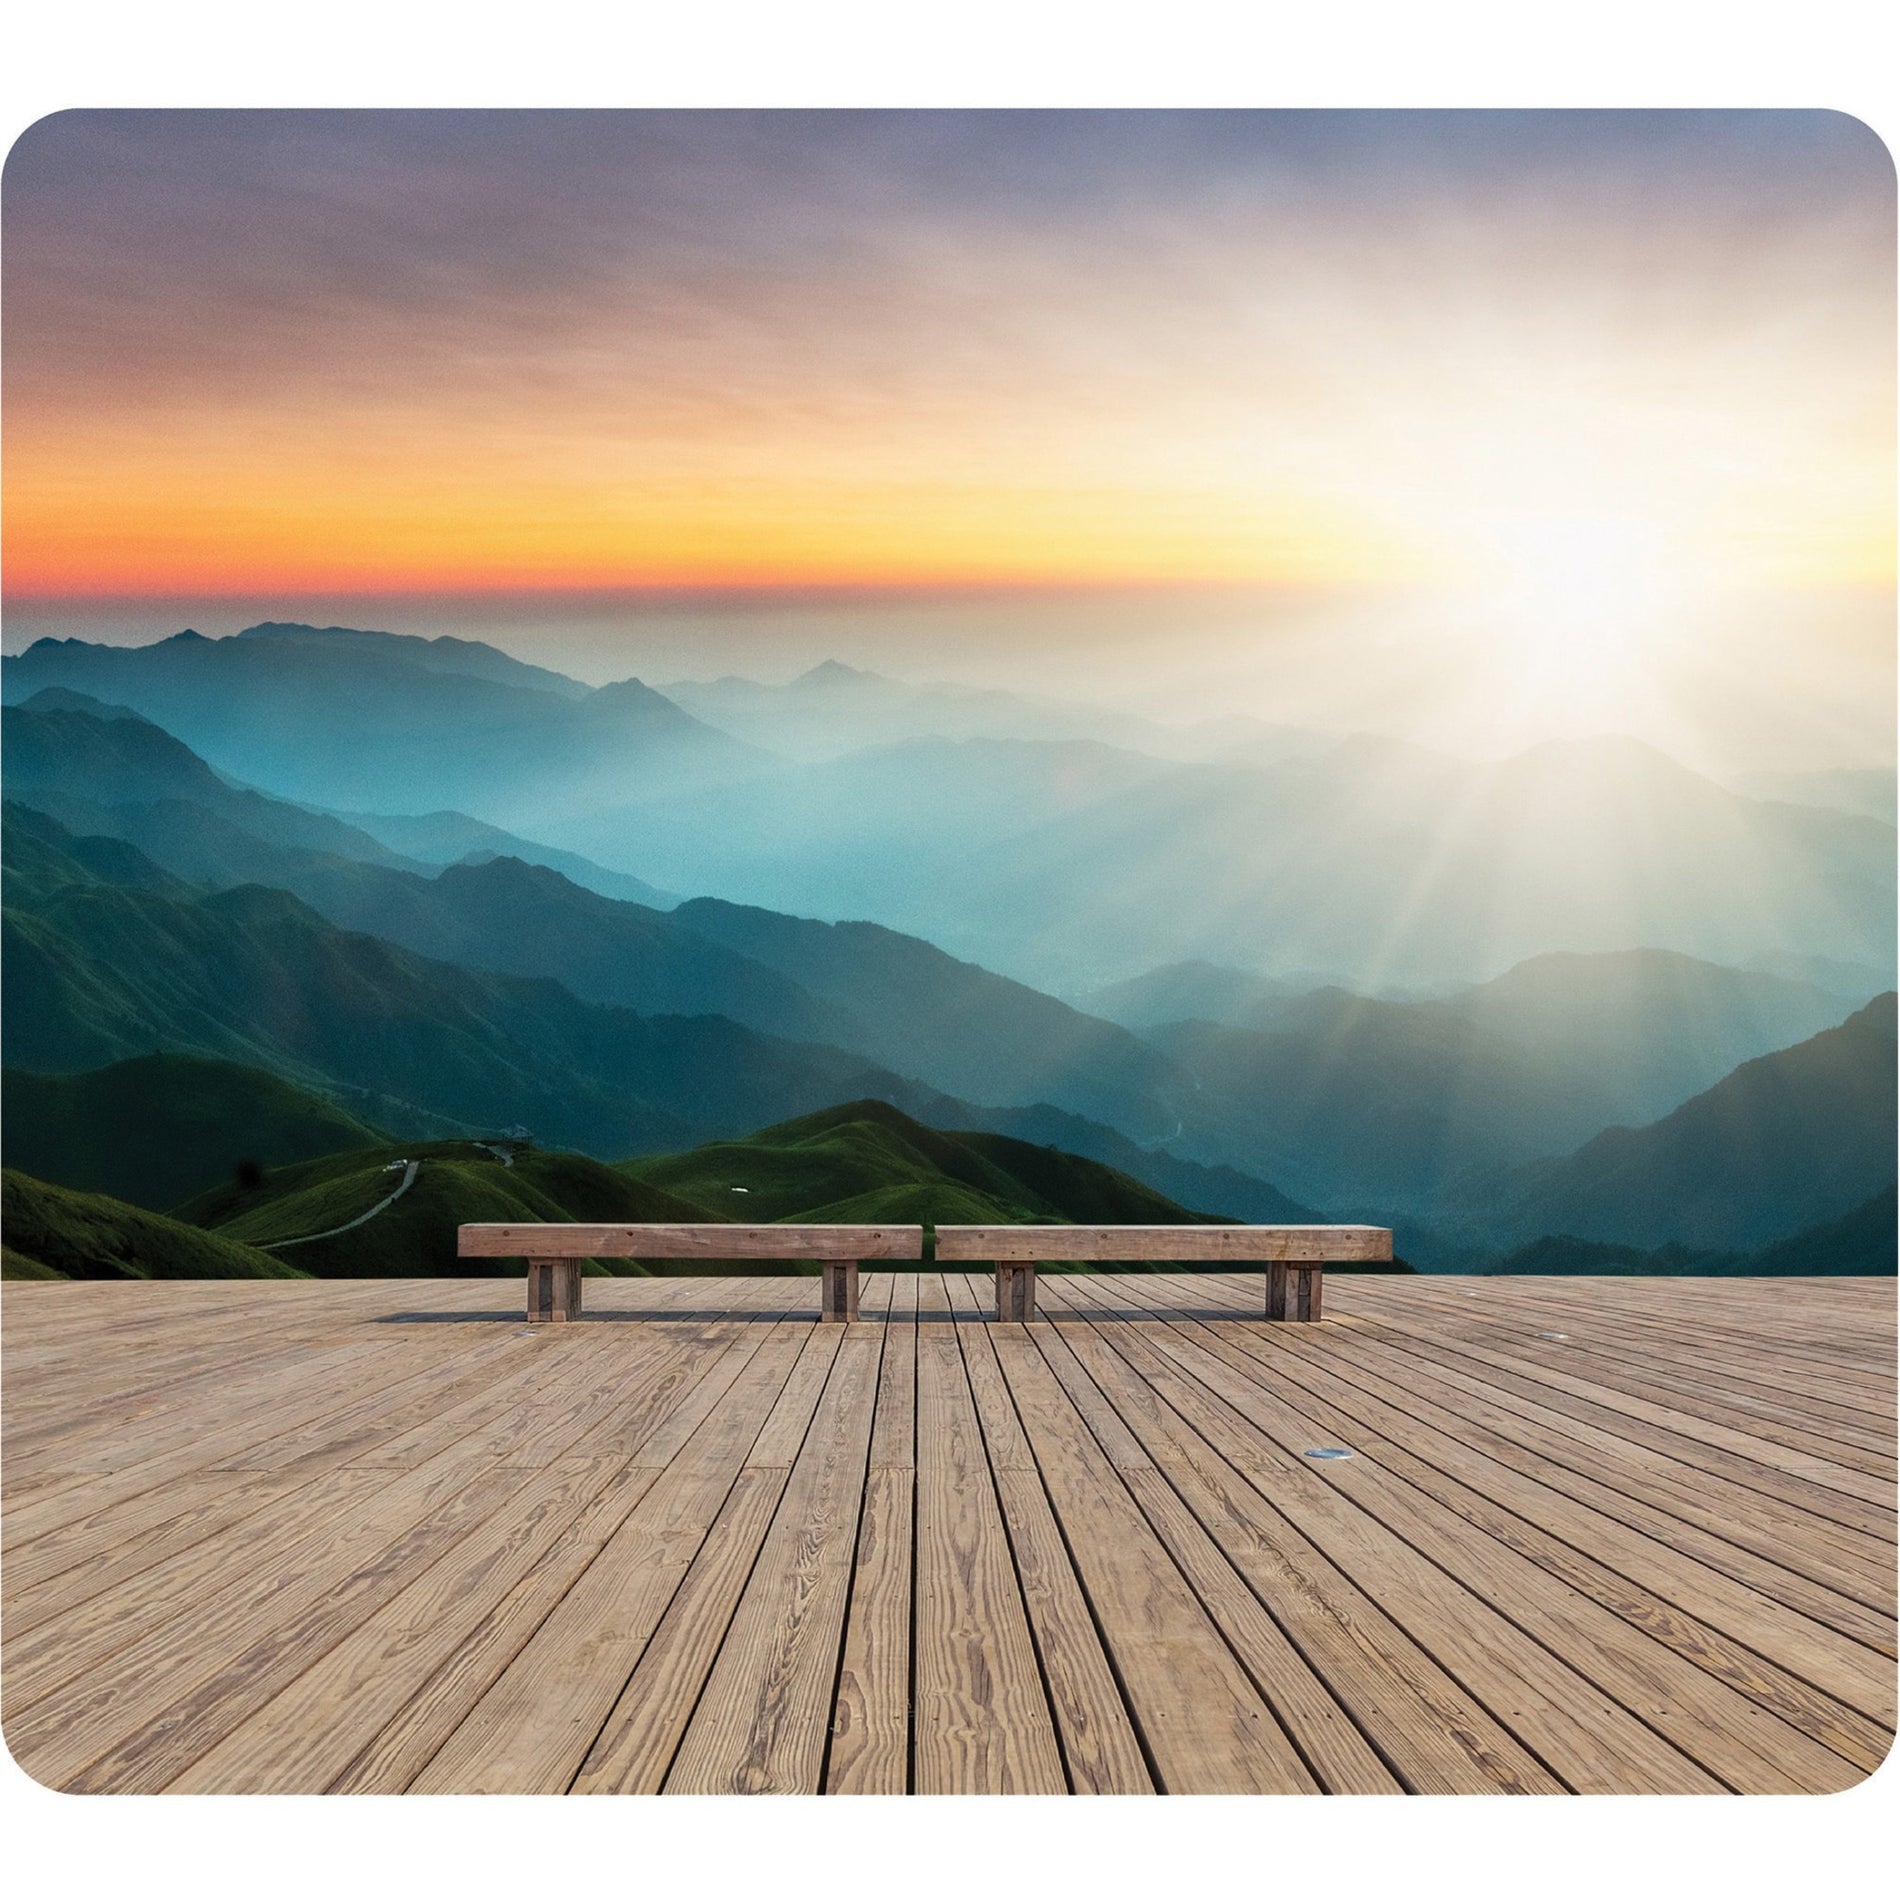 Fellowes Recycled Mouse Pad - Mountain Sunrise, Multi [Discontinued]